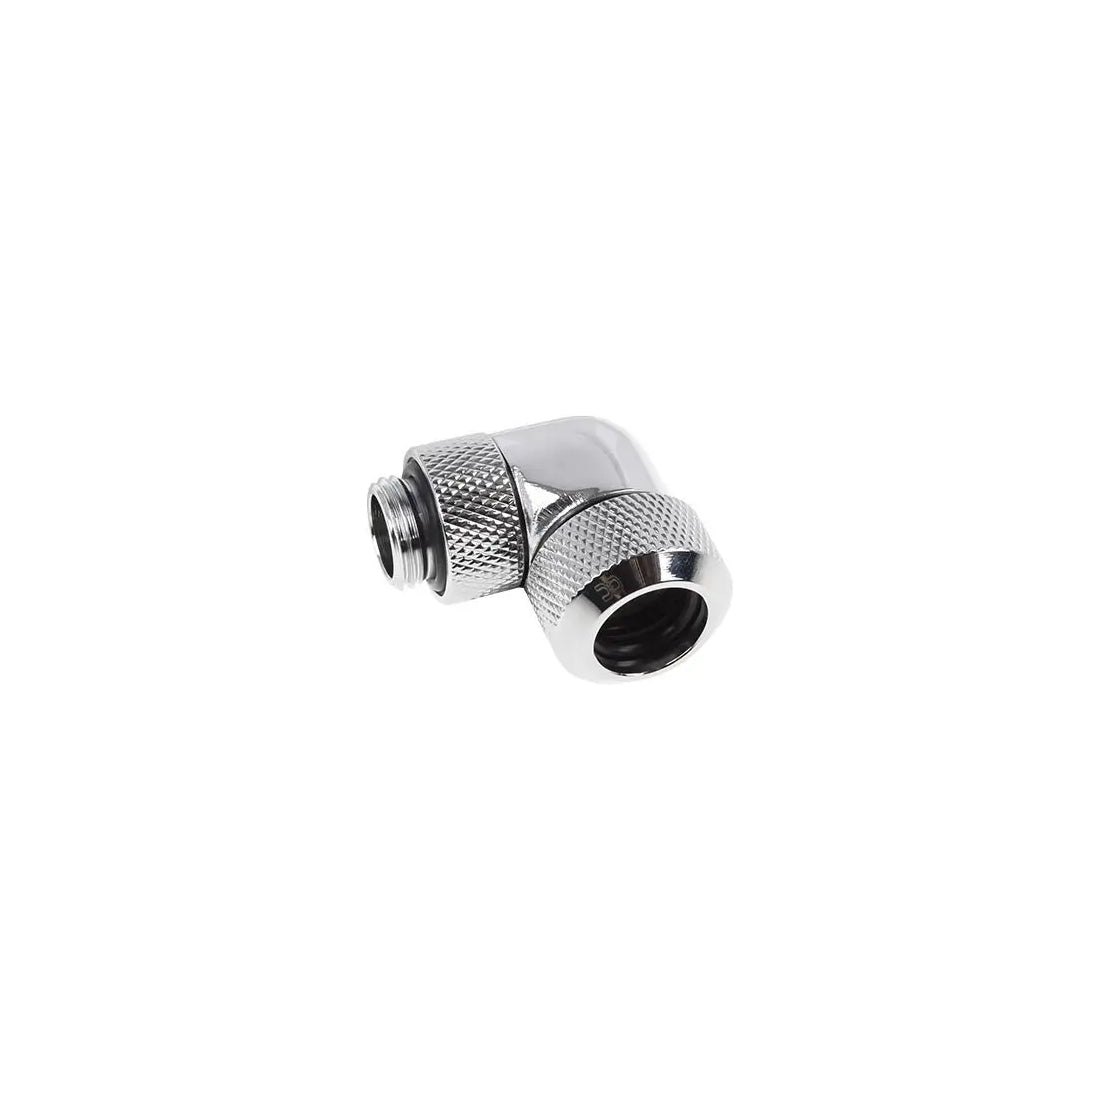 Alphacool Eiszapfen 13mm HardTube compression fitting 90° rotatable G1/4 - knurled - Chrome - Store 974 | ستور ٩٧٤